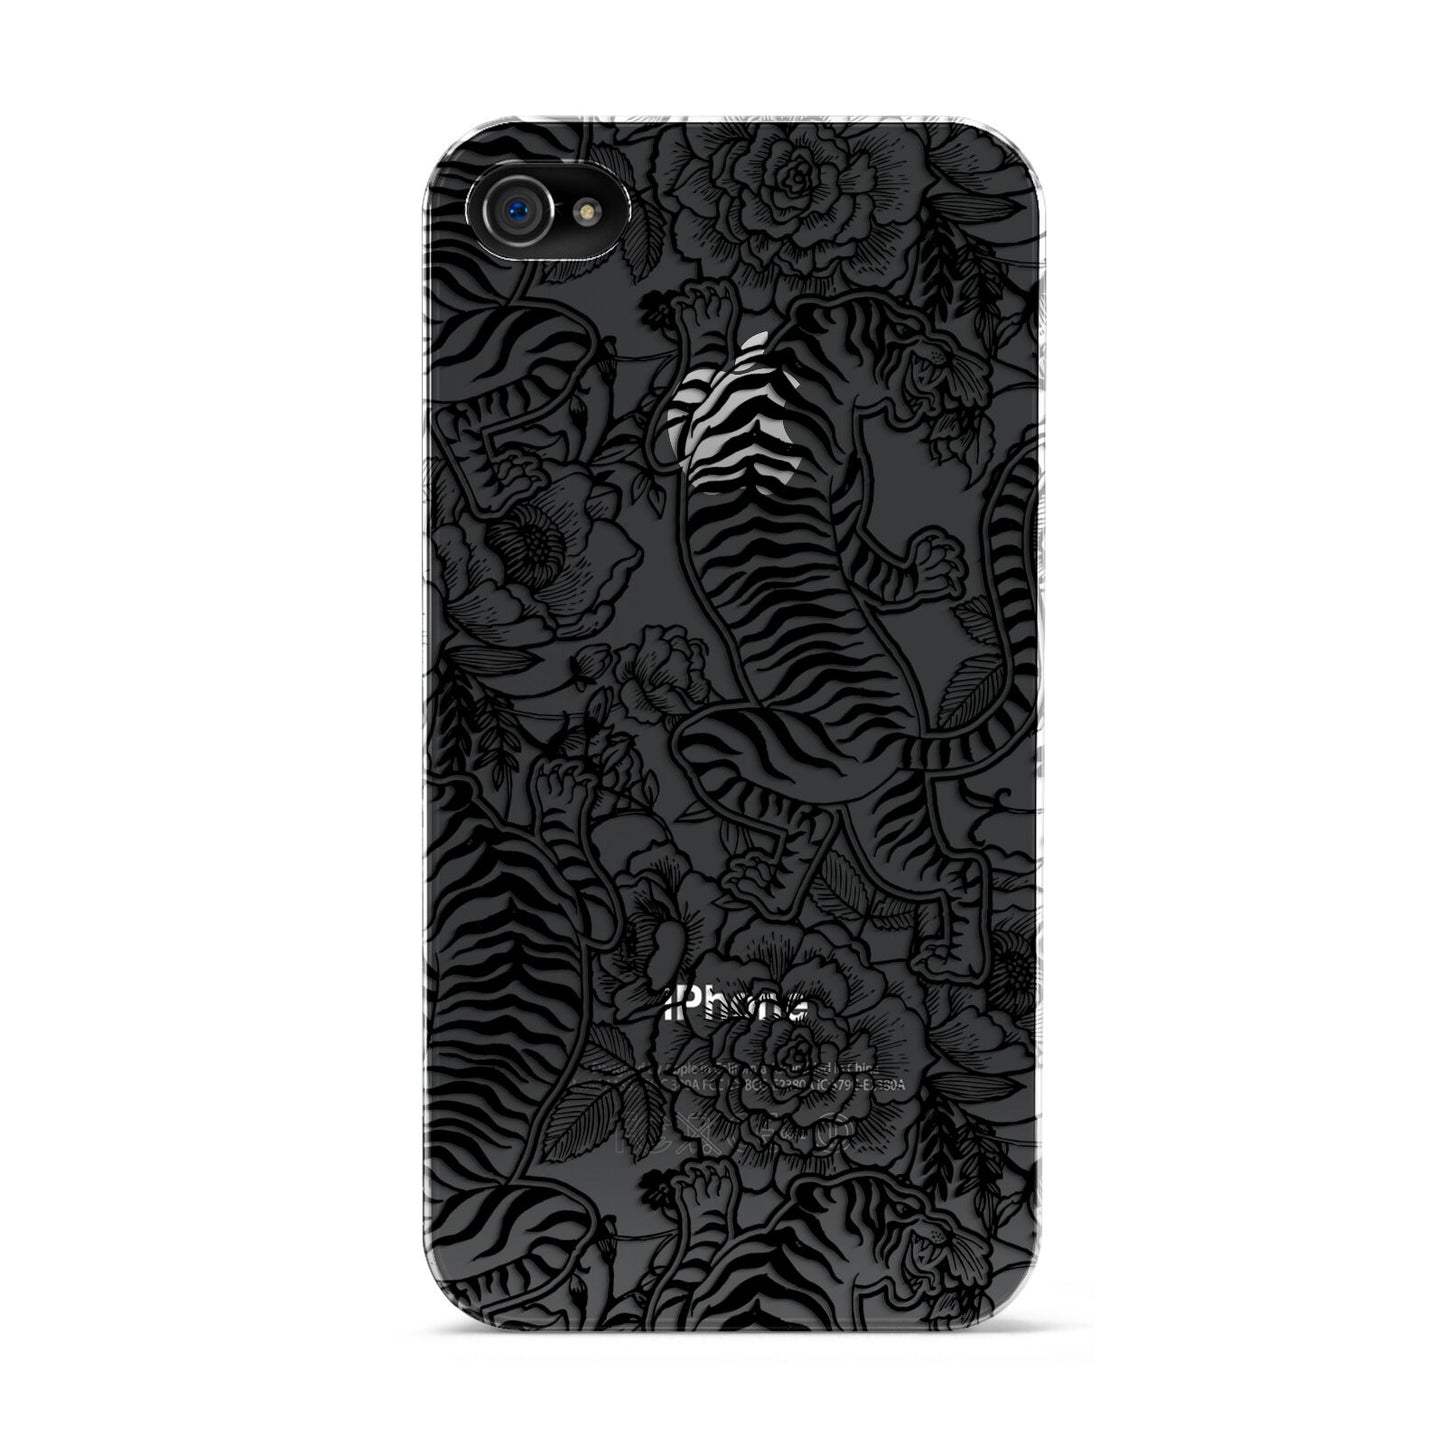 Chinese Tiger Apple iPhone 4s Case